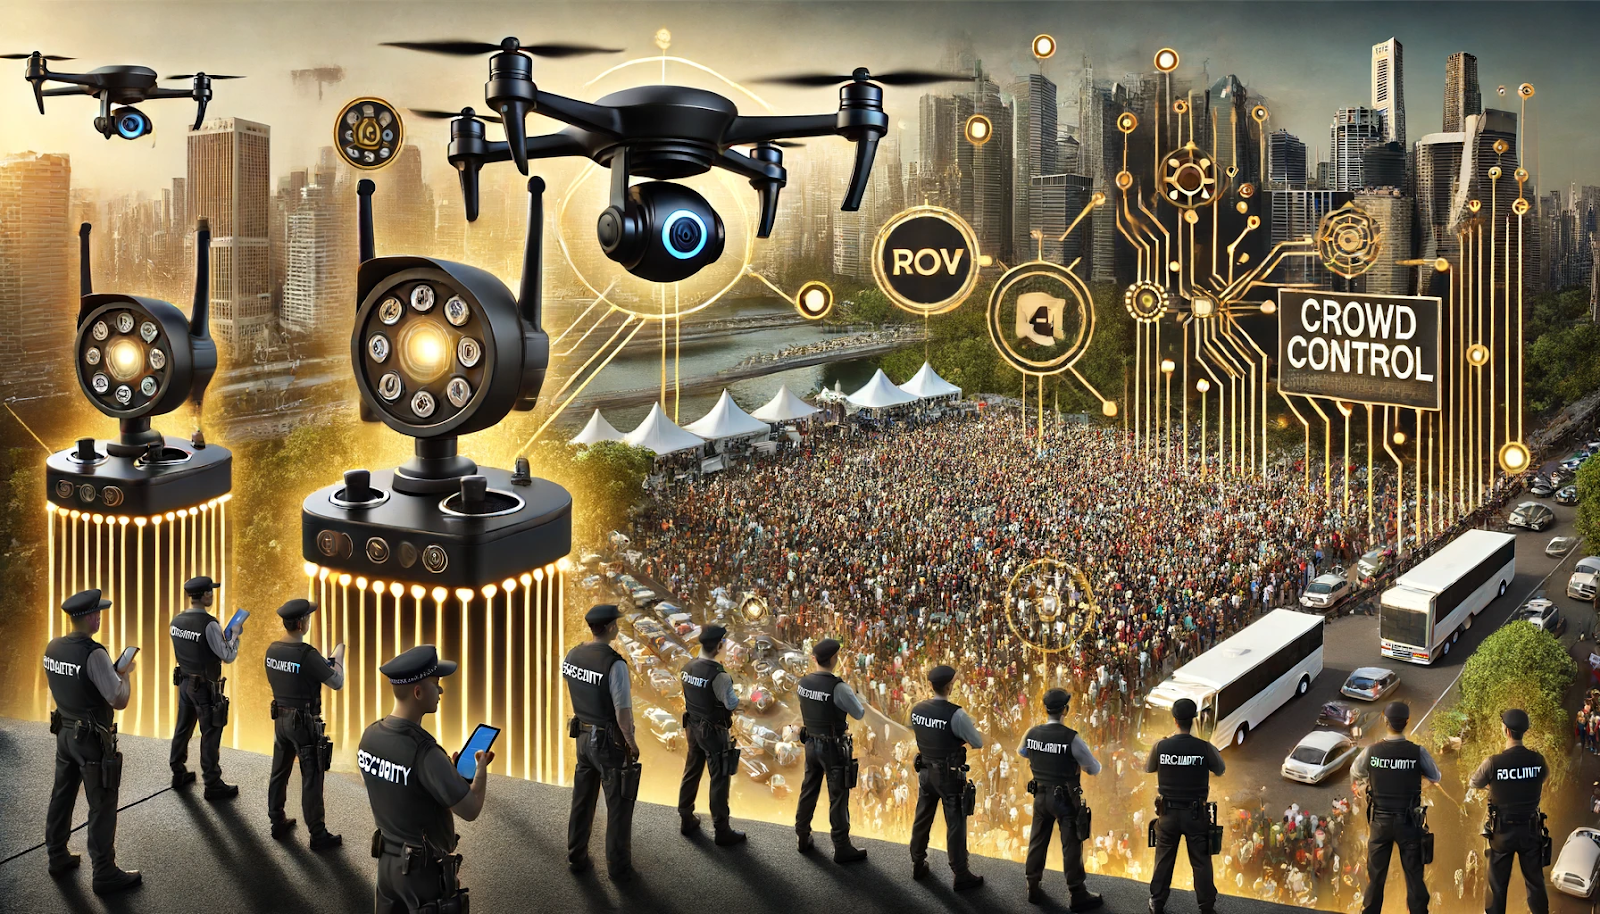 A photorealistic image depicting modern crowd control technology, featuring black and gold colors.  